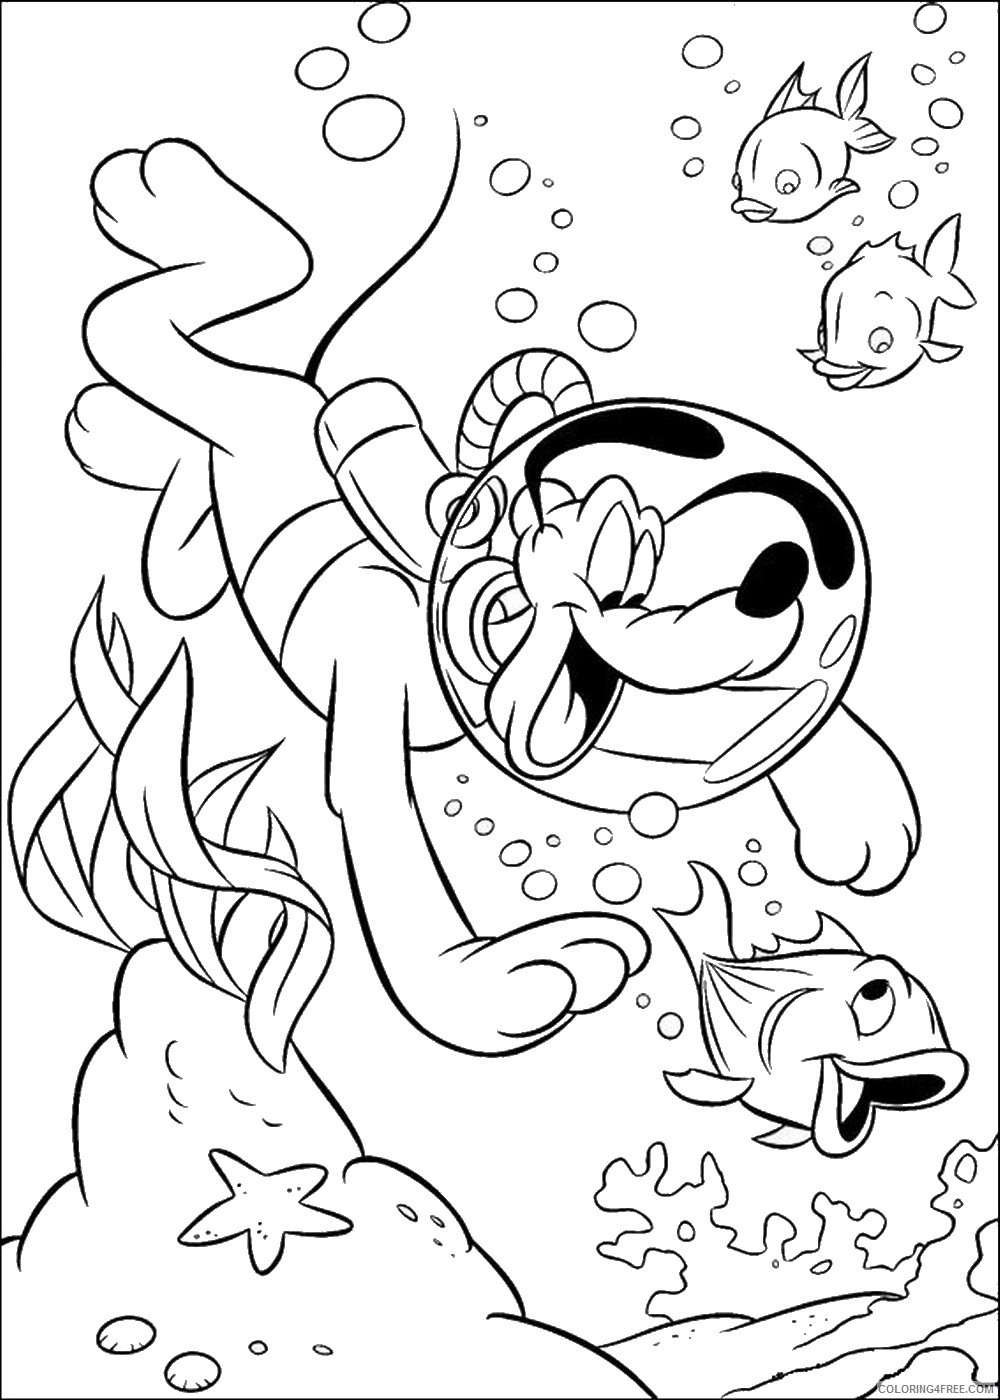 Pluto Coloring Pages Cartoons pluto_cl_41 Printable 2020 4951 Coloring4free